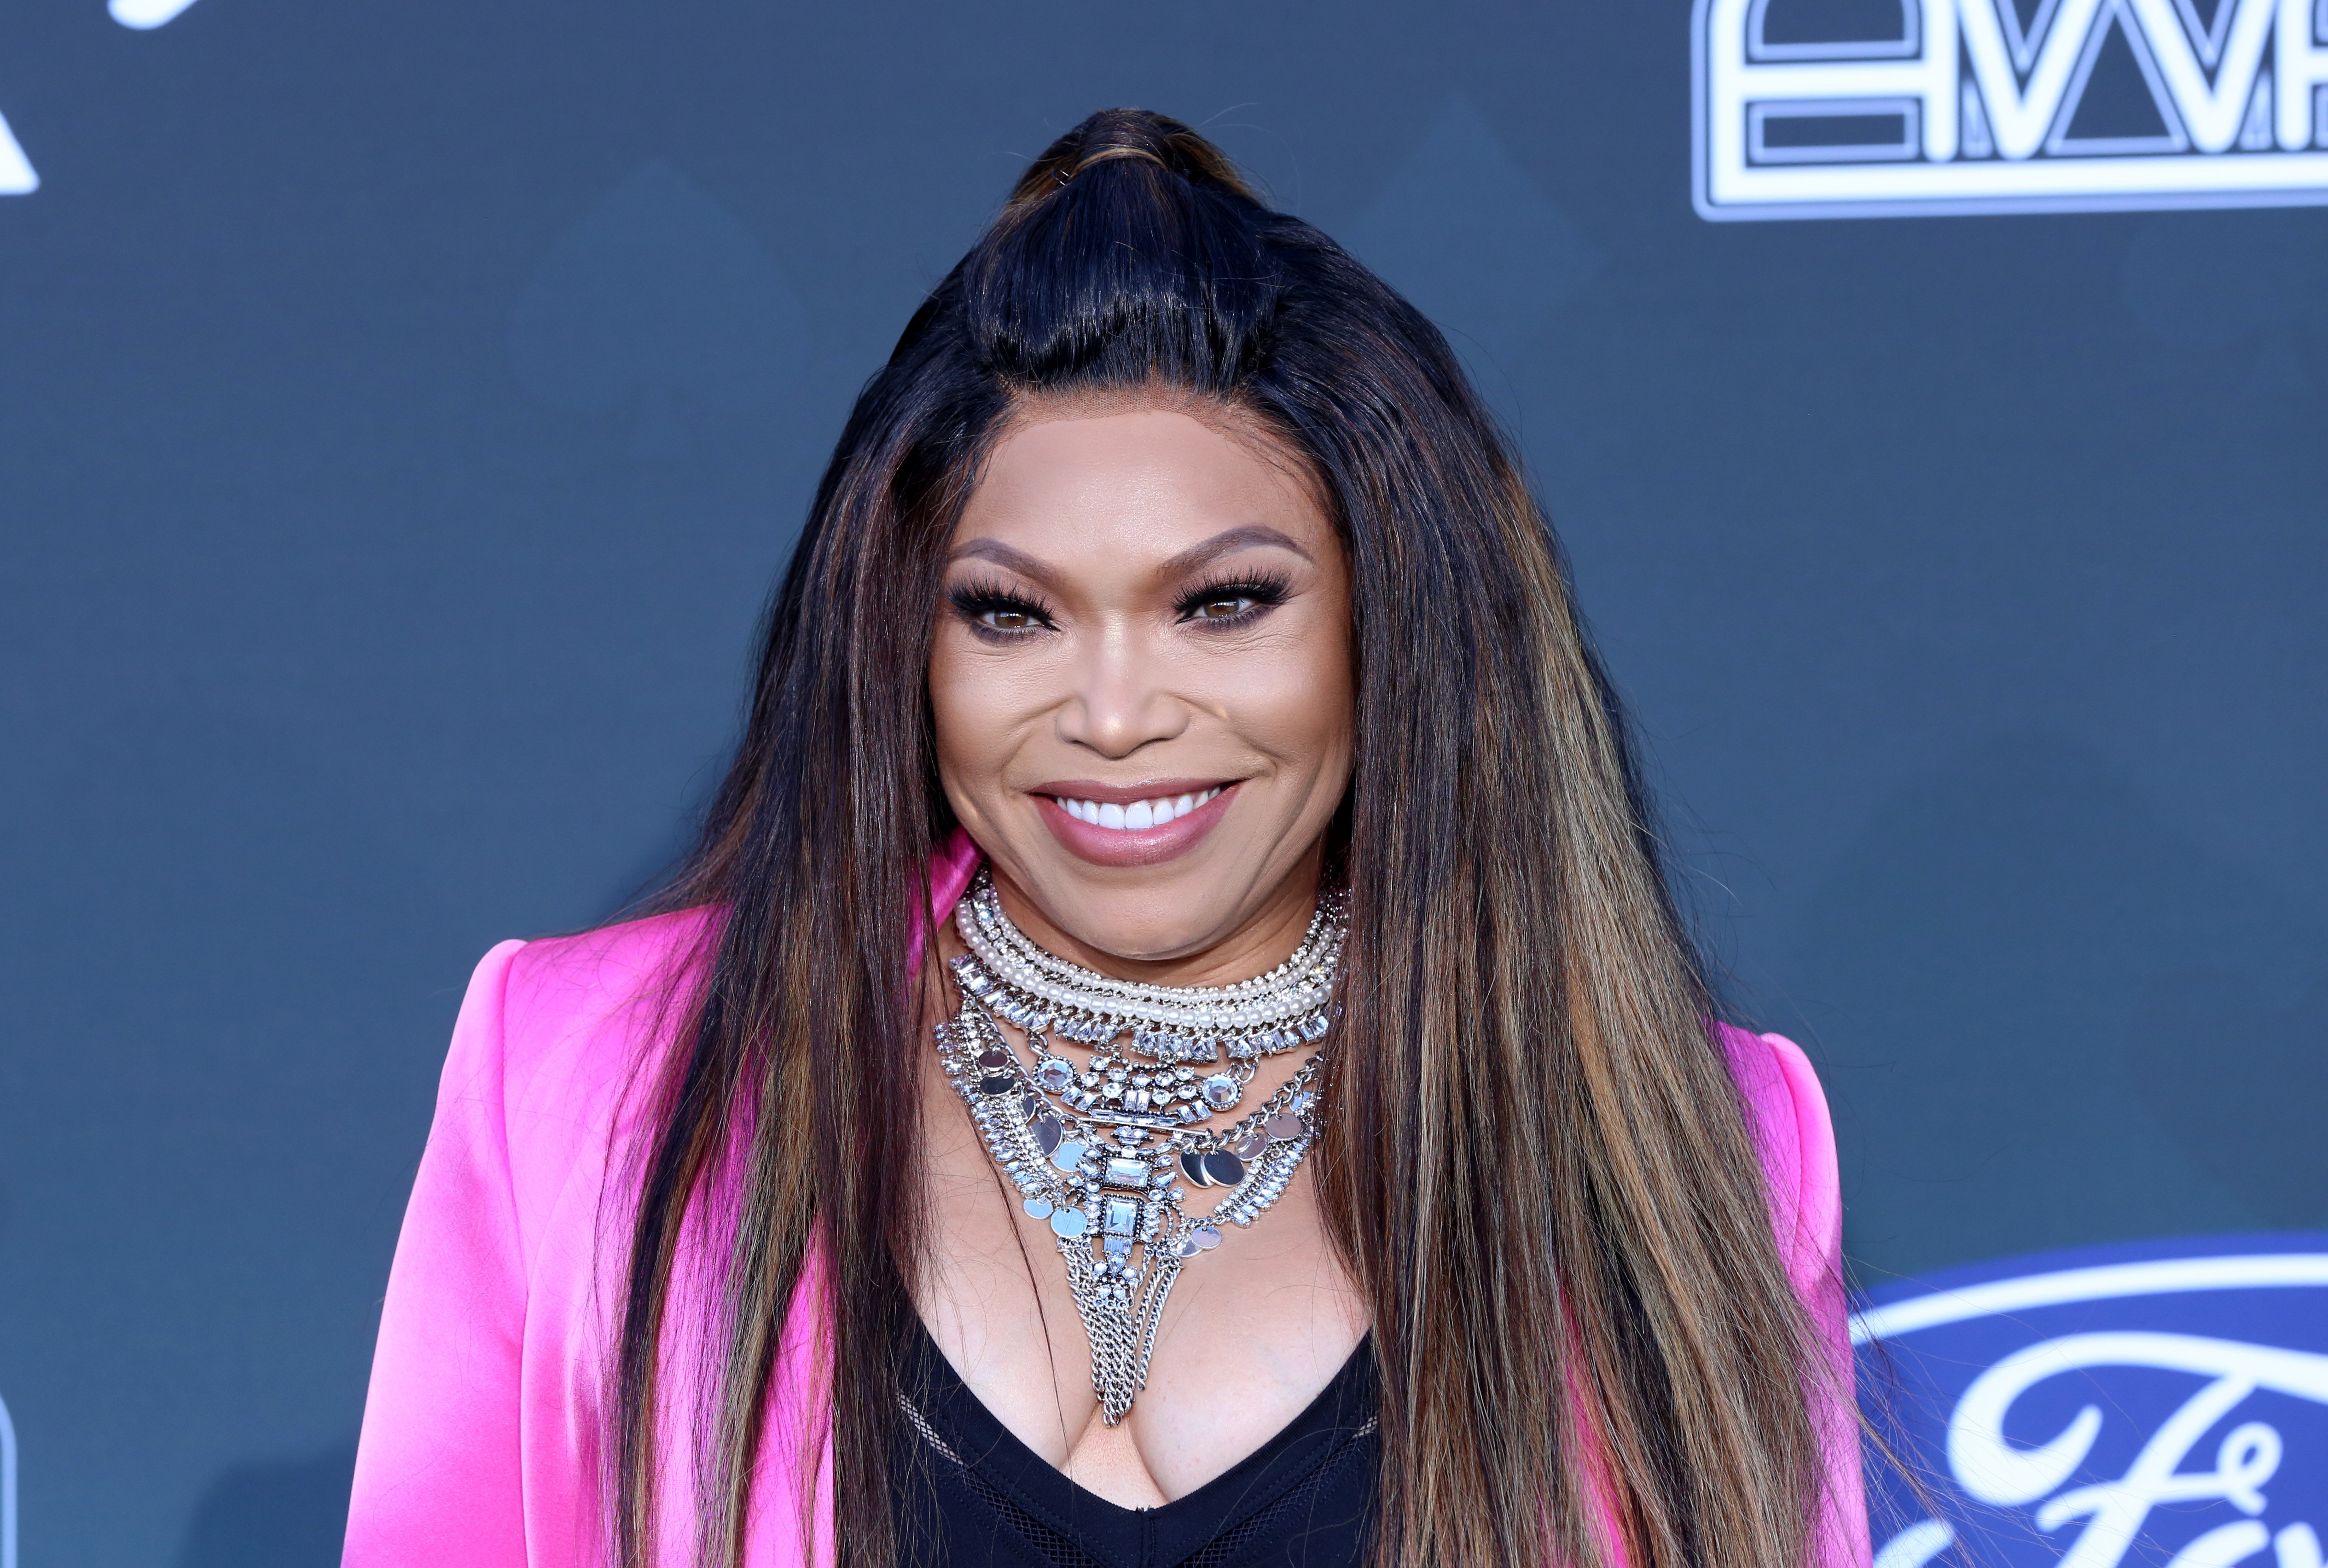 Tisha Campbell attends the 2019 Soul Train Awards at the Orleans Arena on November 17, 2019 in Las Vegas, Nevada. | Photo: Getty Images